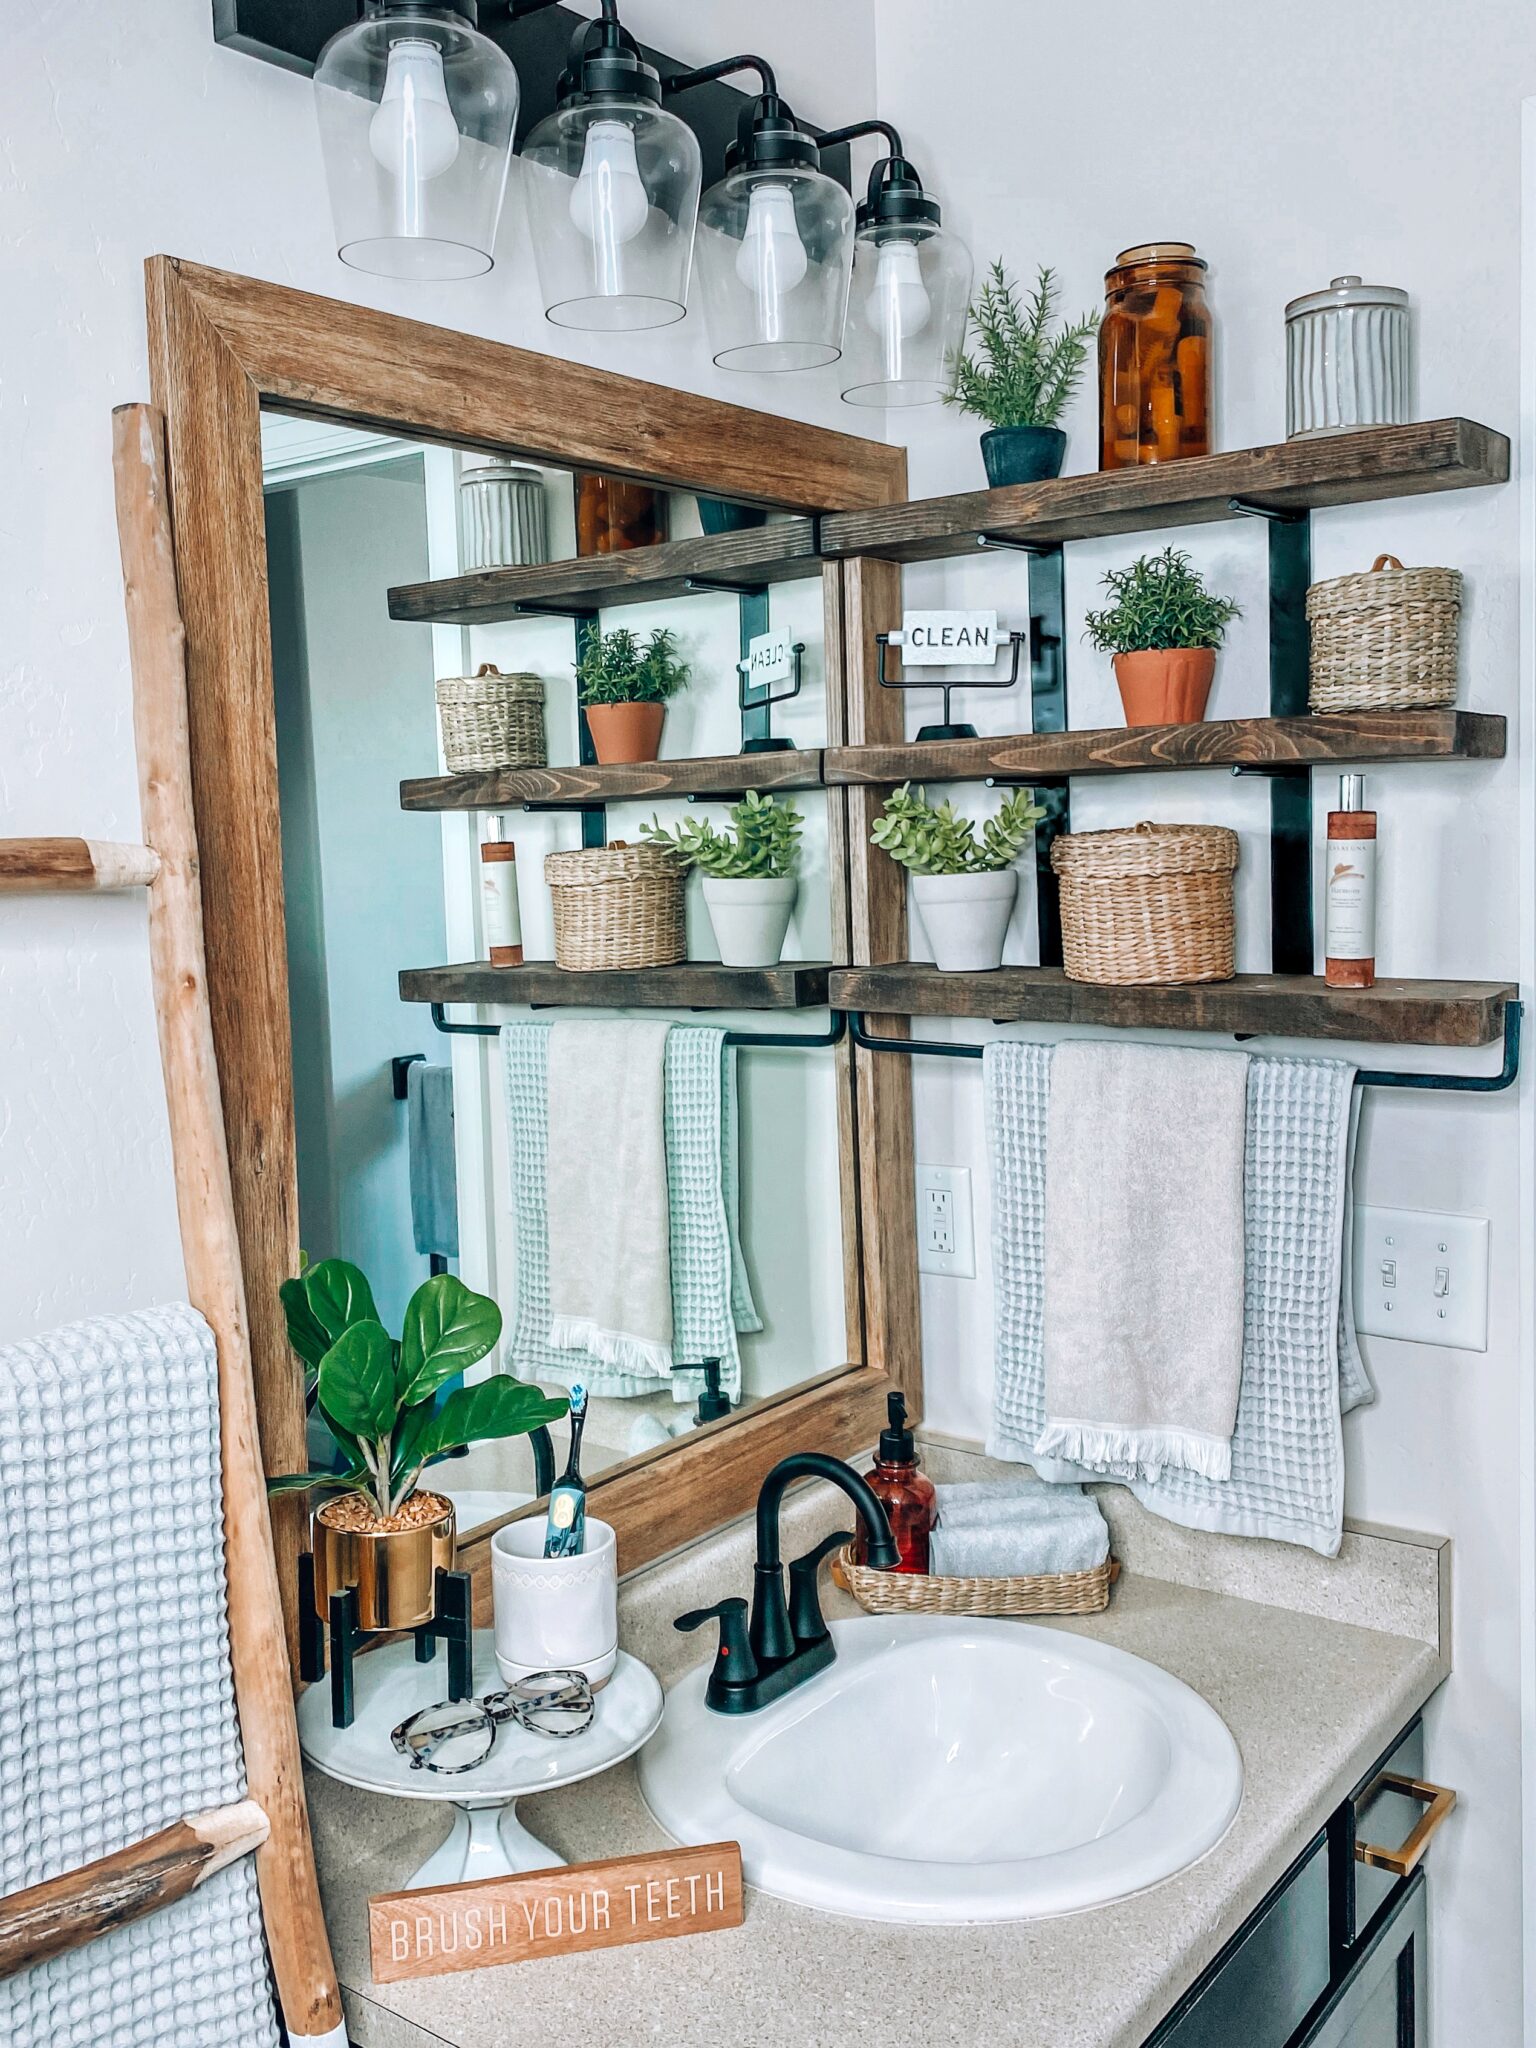 10 Easy Ways to Update Your Bathroom - Life & Midsize Style by Taryn Truly